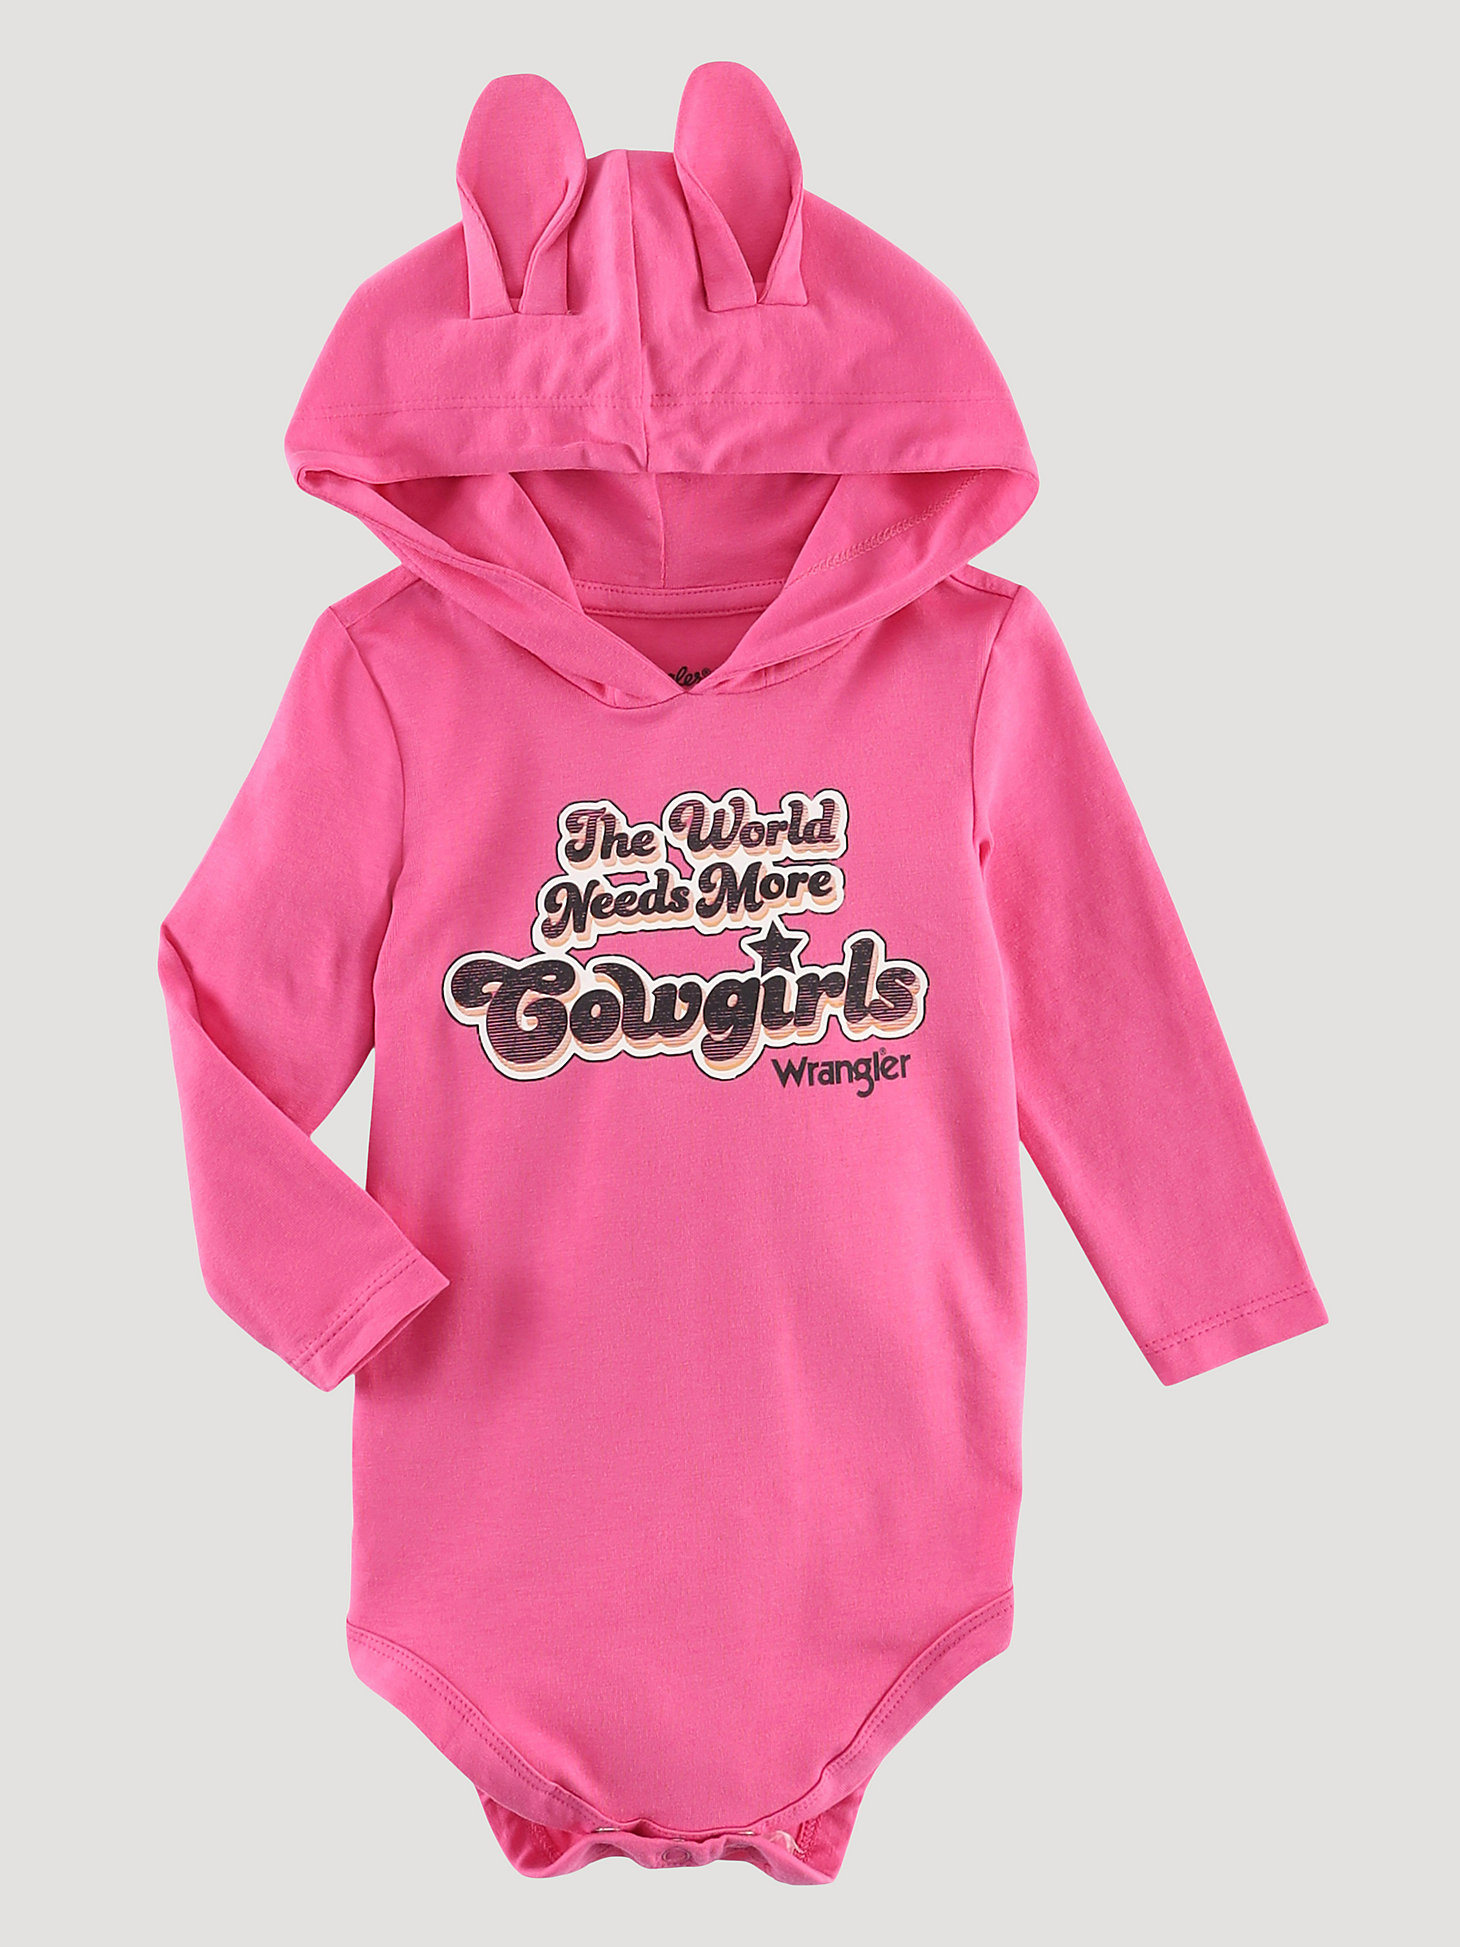 Baby Girl's Cowgirls Hooded Bodysuit in Pink main view